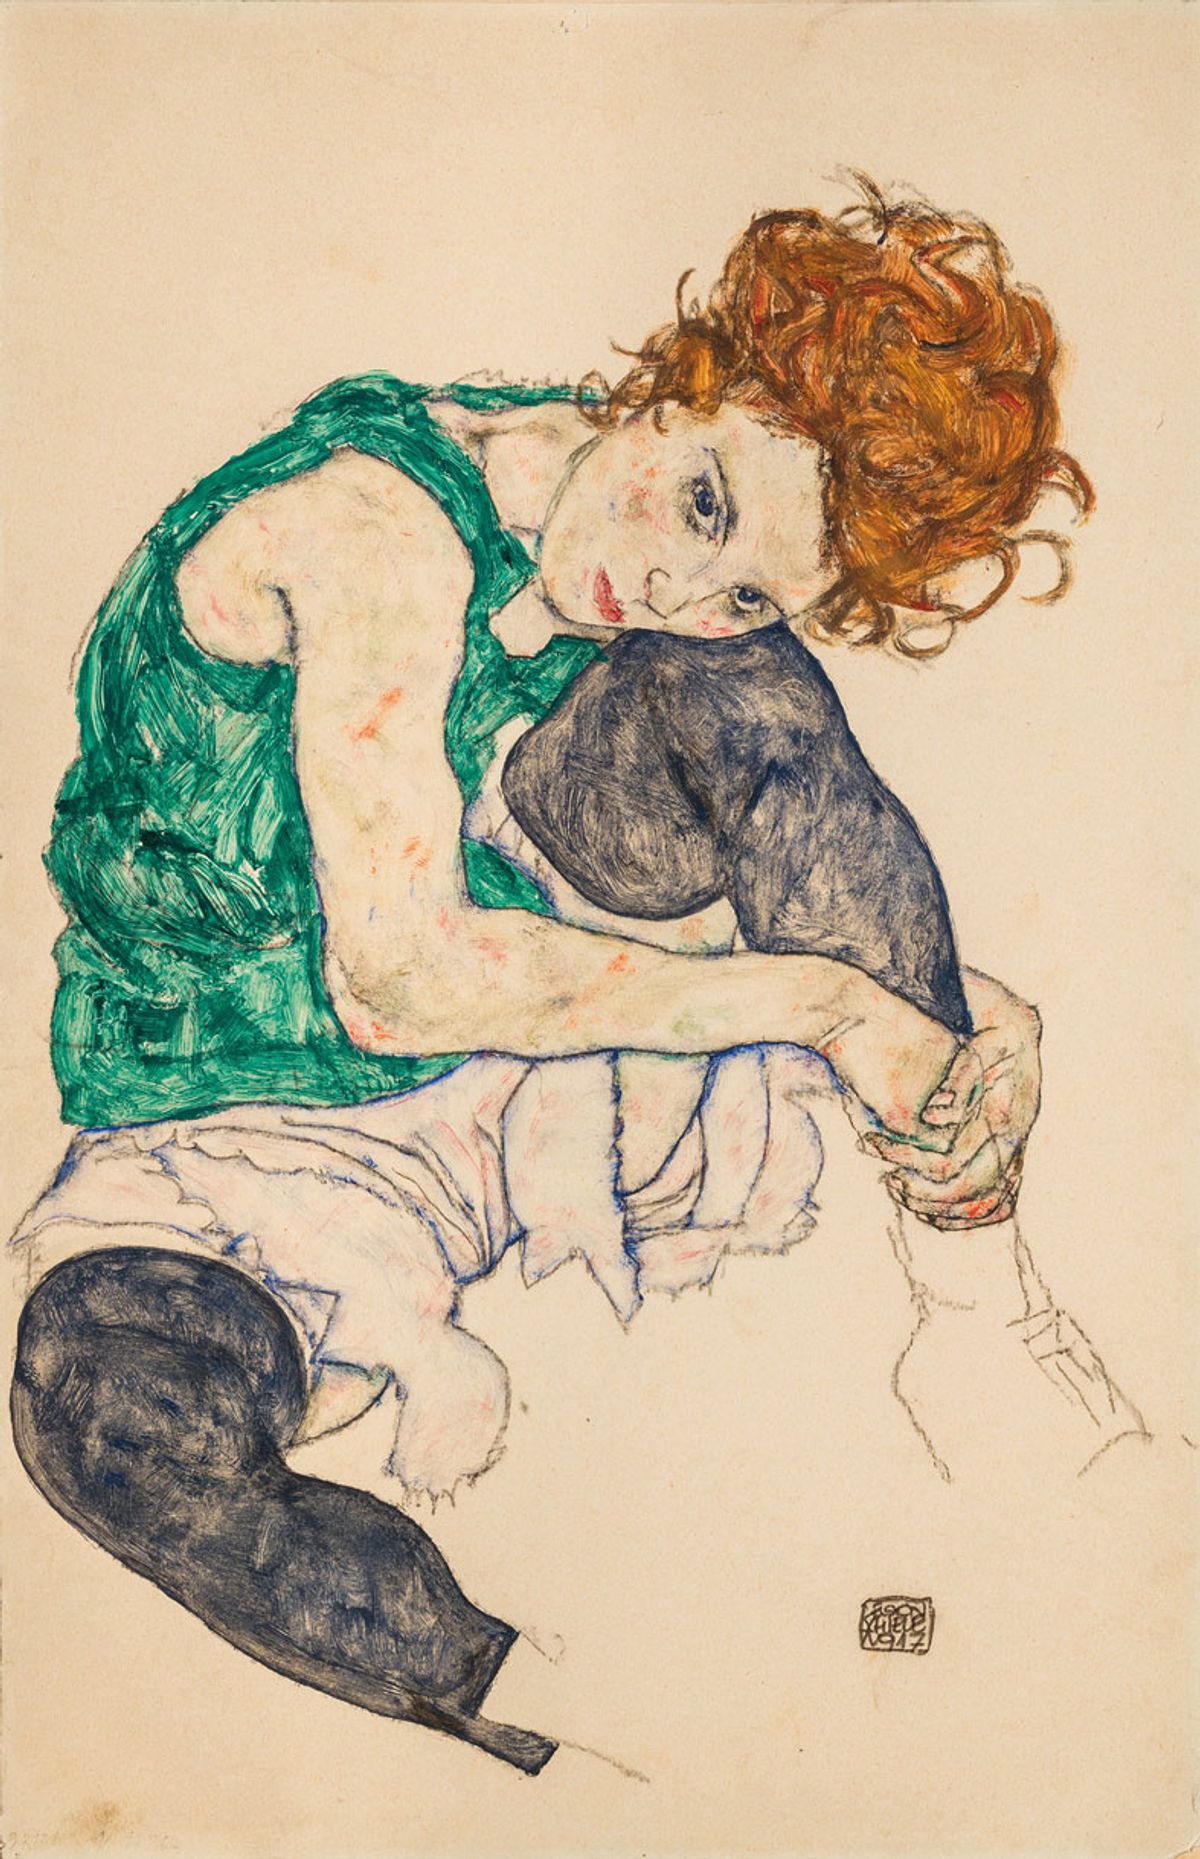 Egon Schiele's Seated Woman with Legs Drawn Up (Adele Herms) (1917) features in Caroline Campbell's The Power of Art